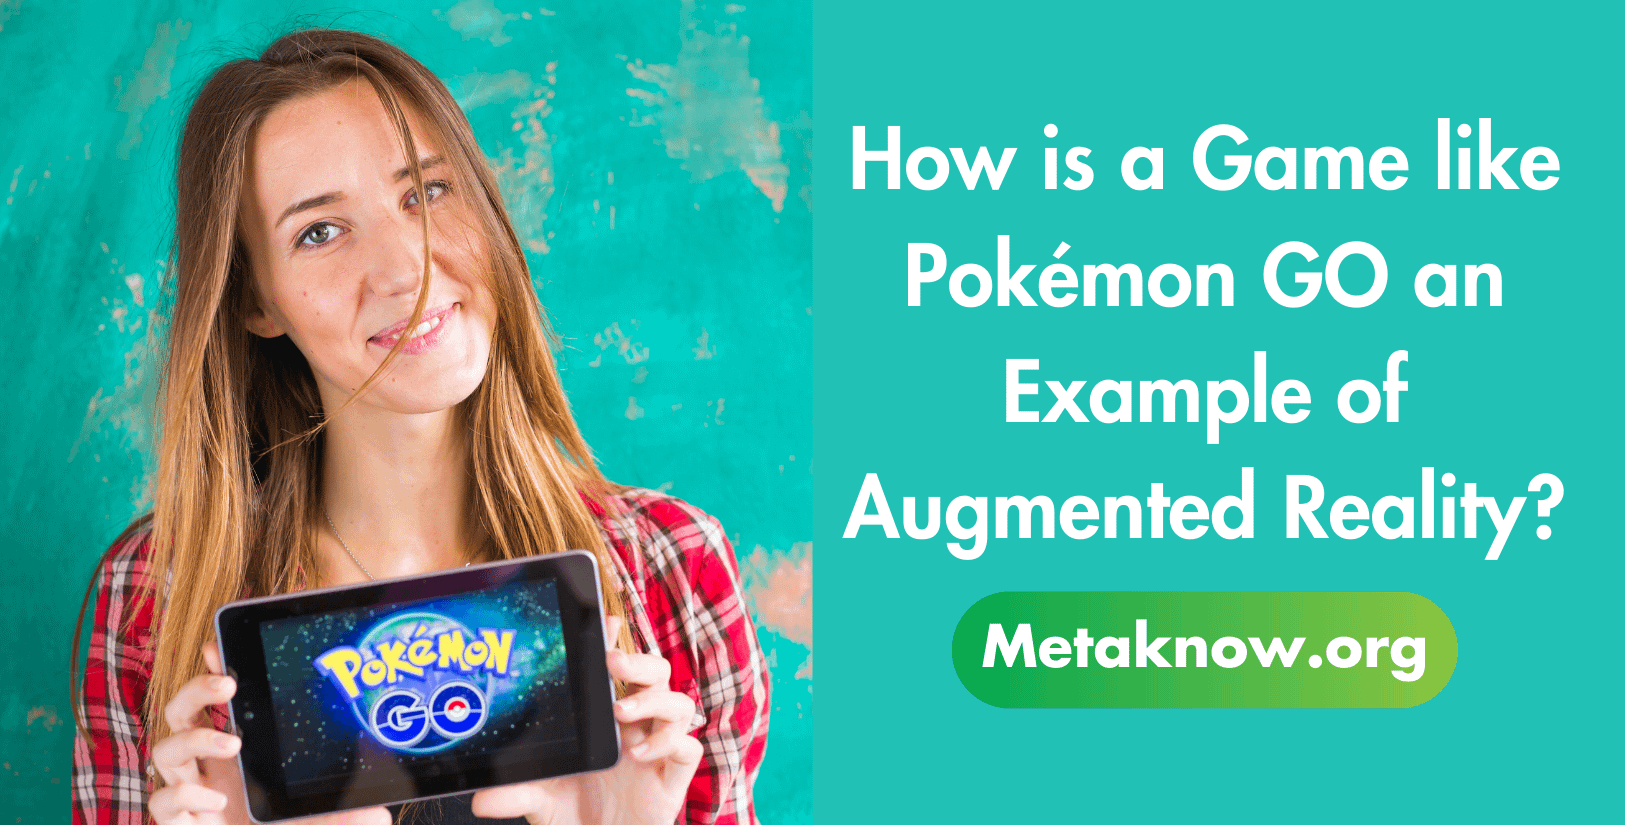 How is a Game like Pokémon GO an Example of Augmented Reality?